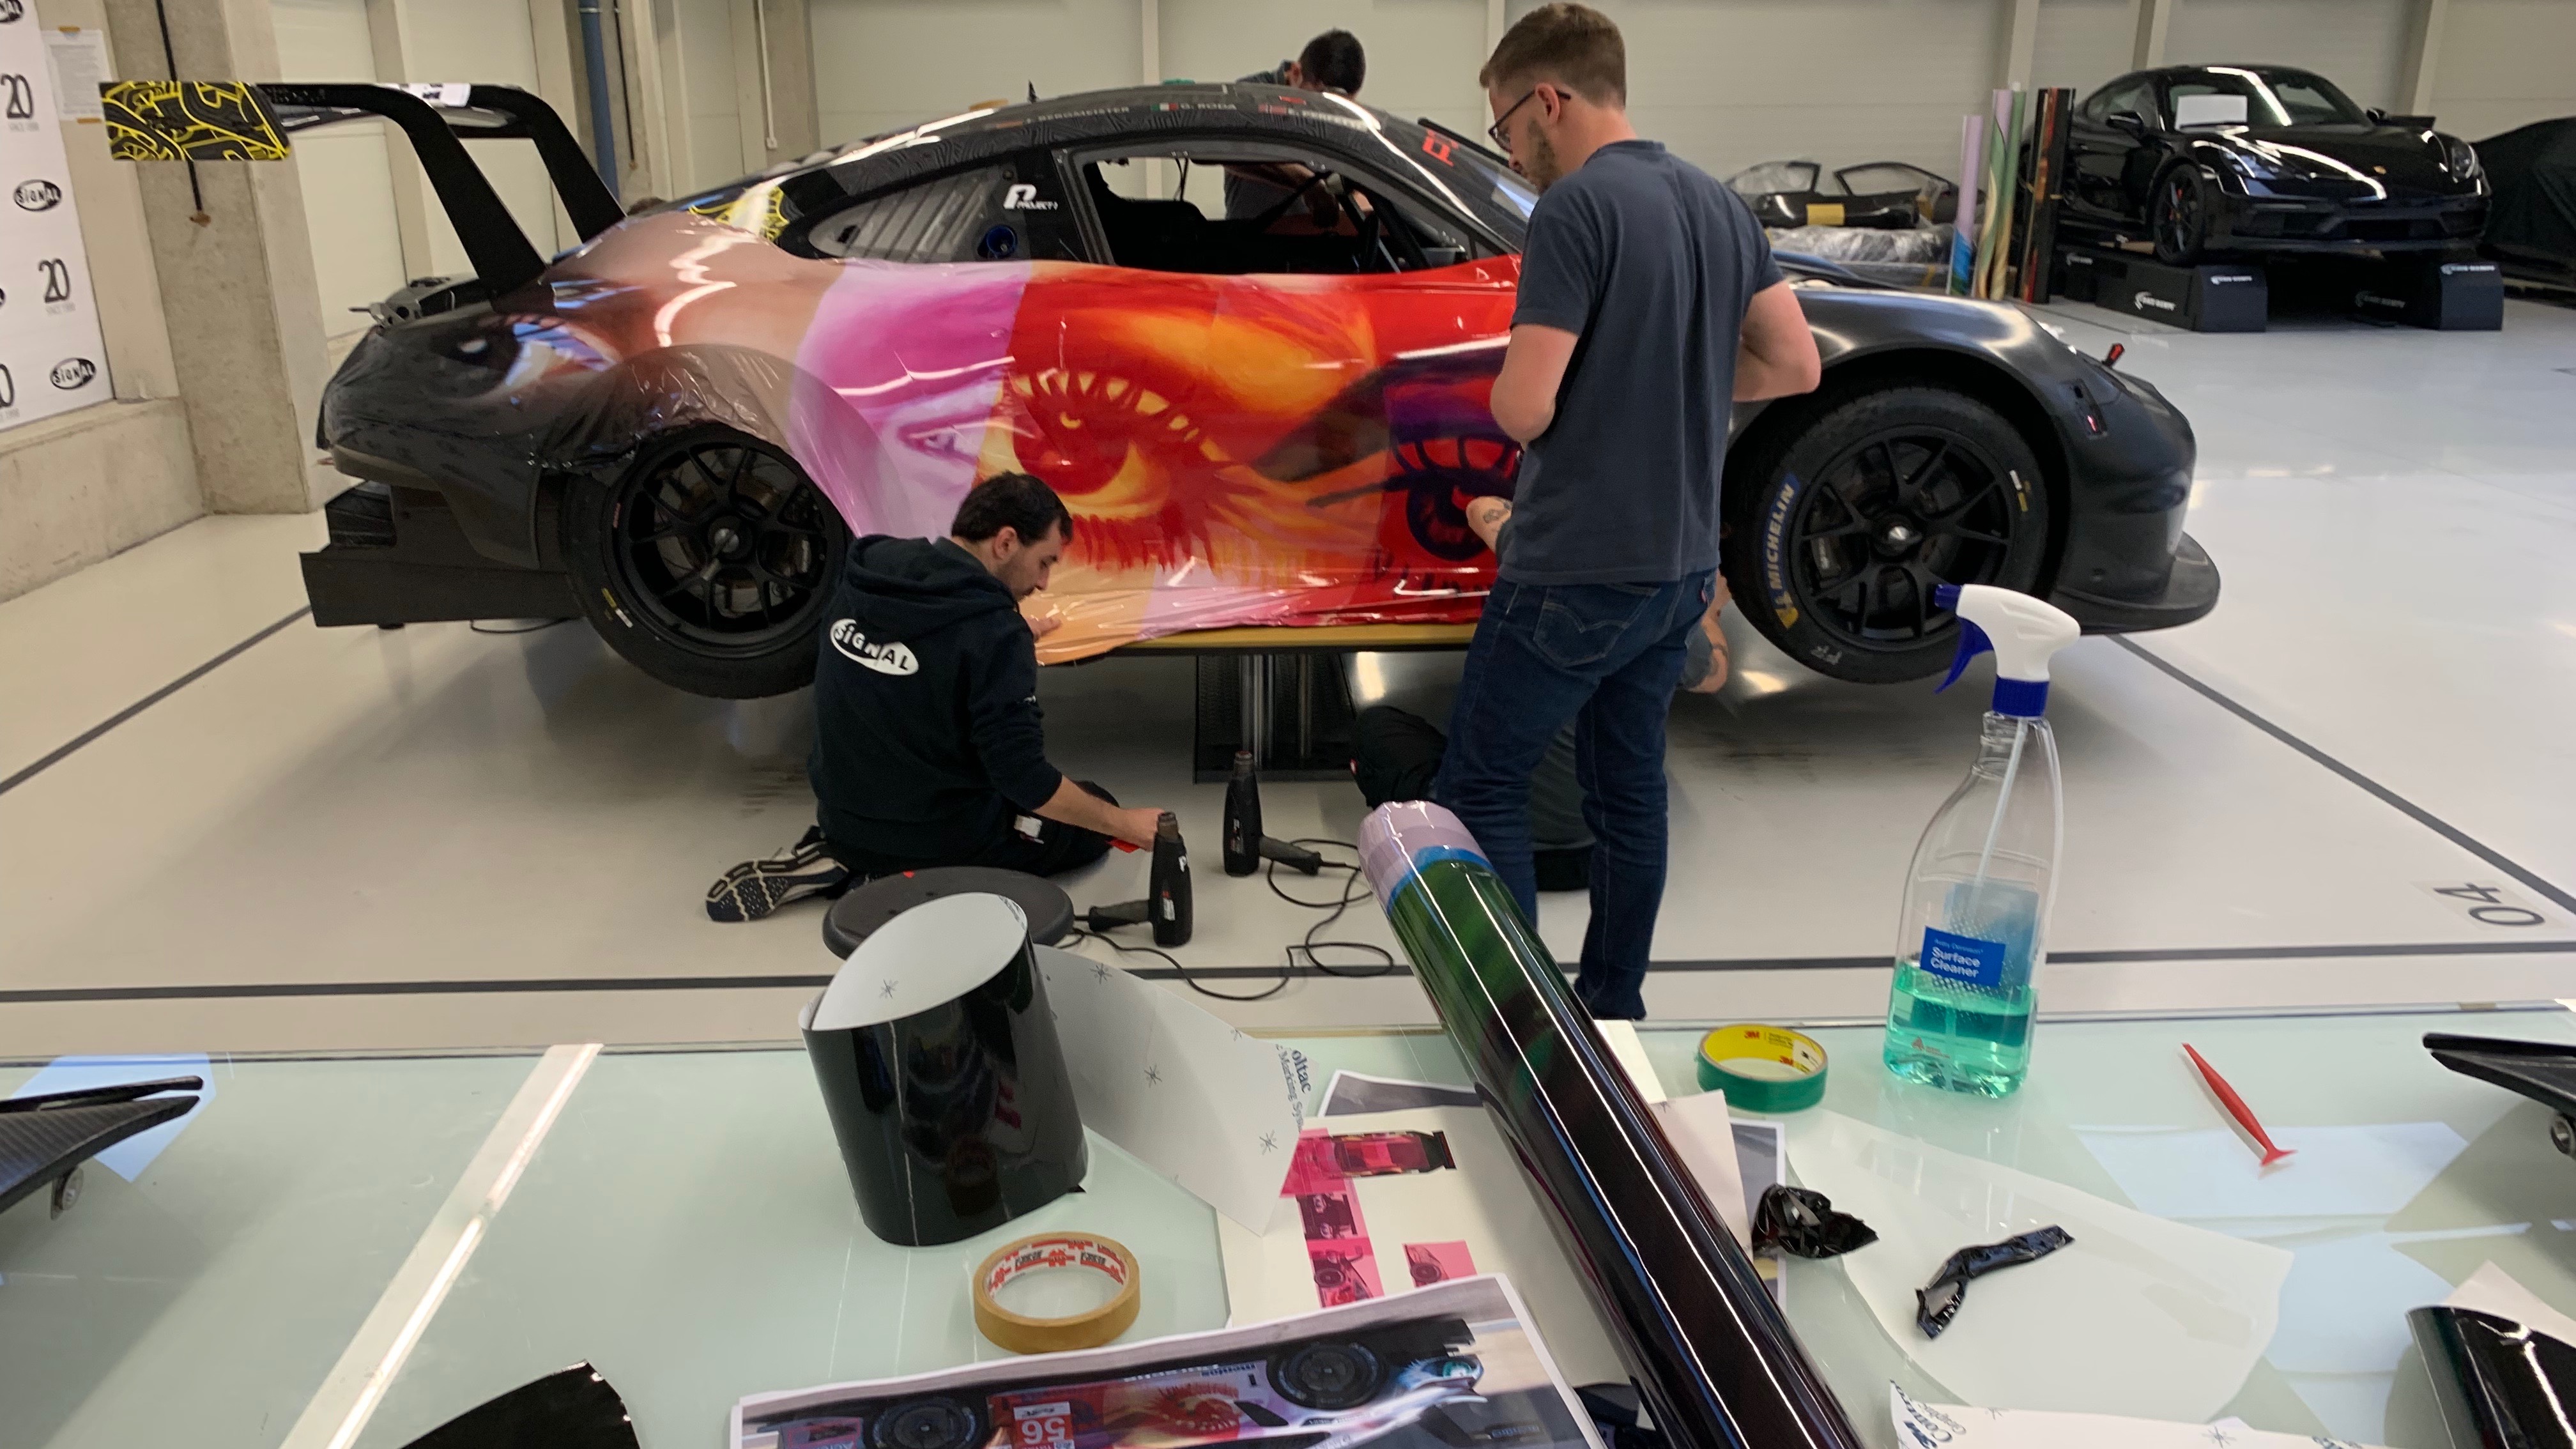 911 RSR Richard Phillips art car having its wrap fitted